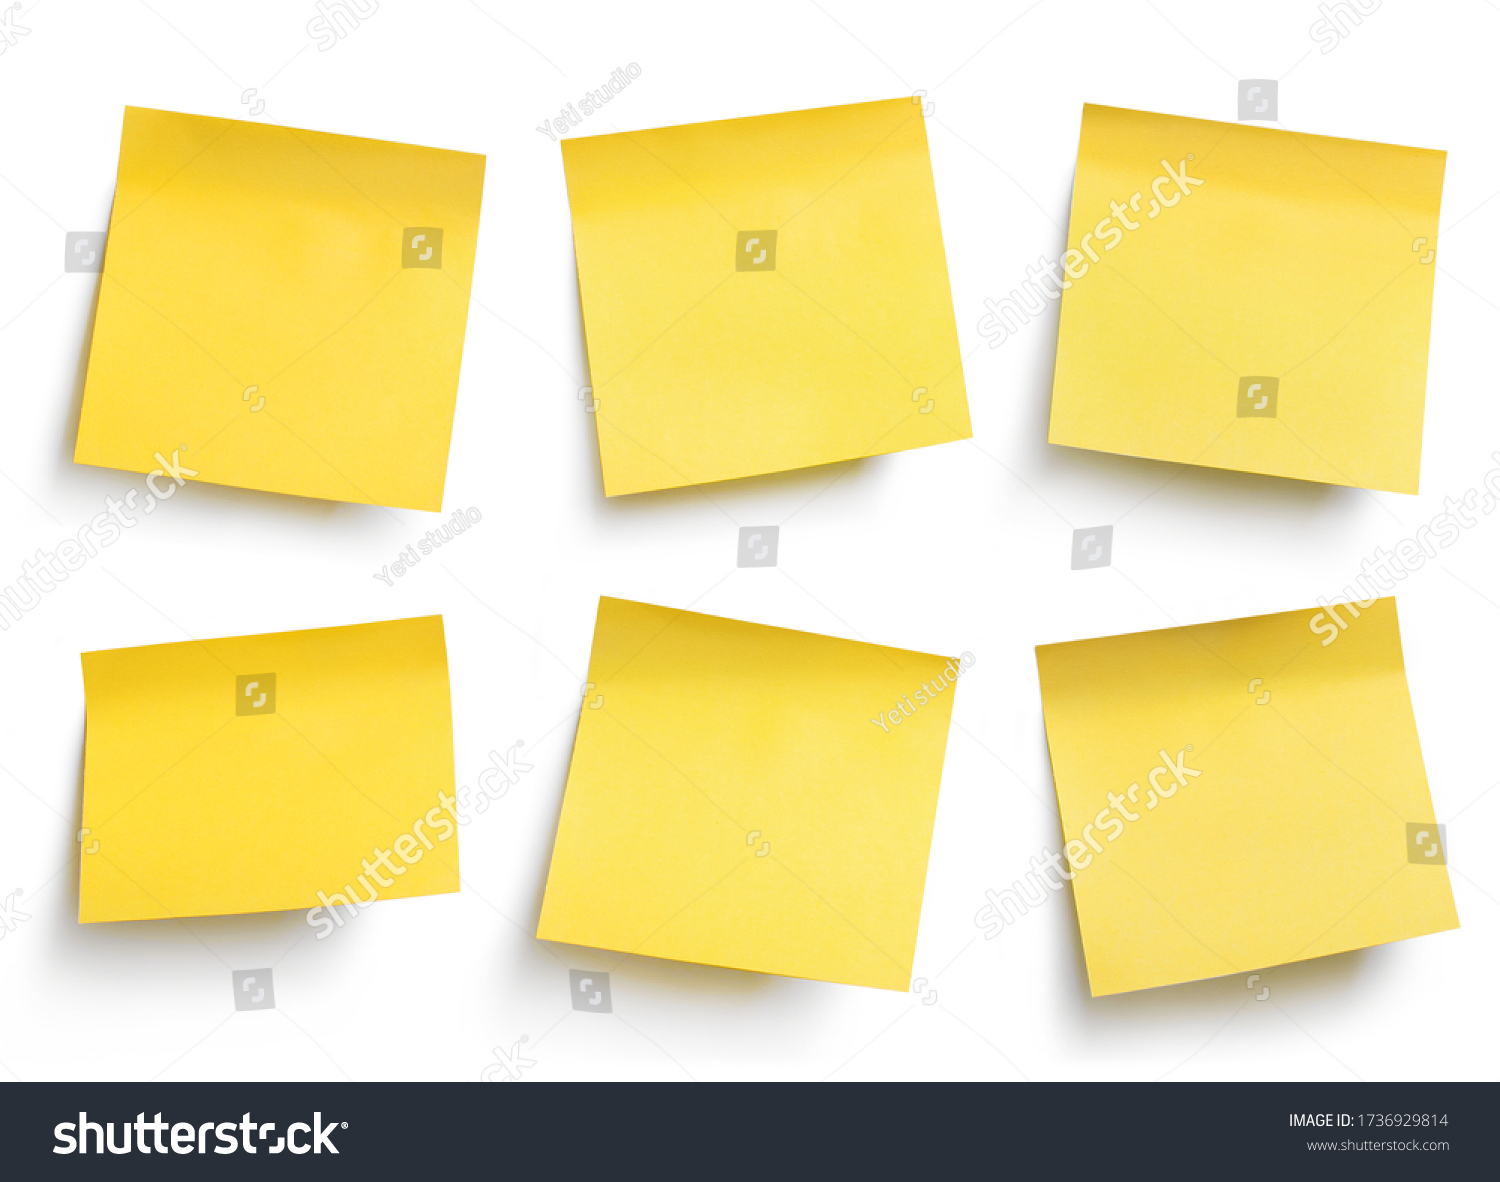 Yellow blank sticky paper sheets, isolated on white background #1736929814